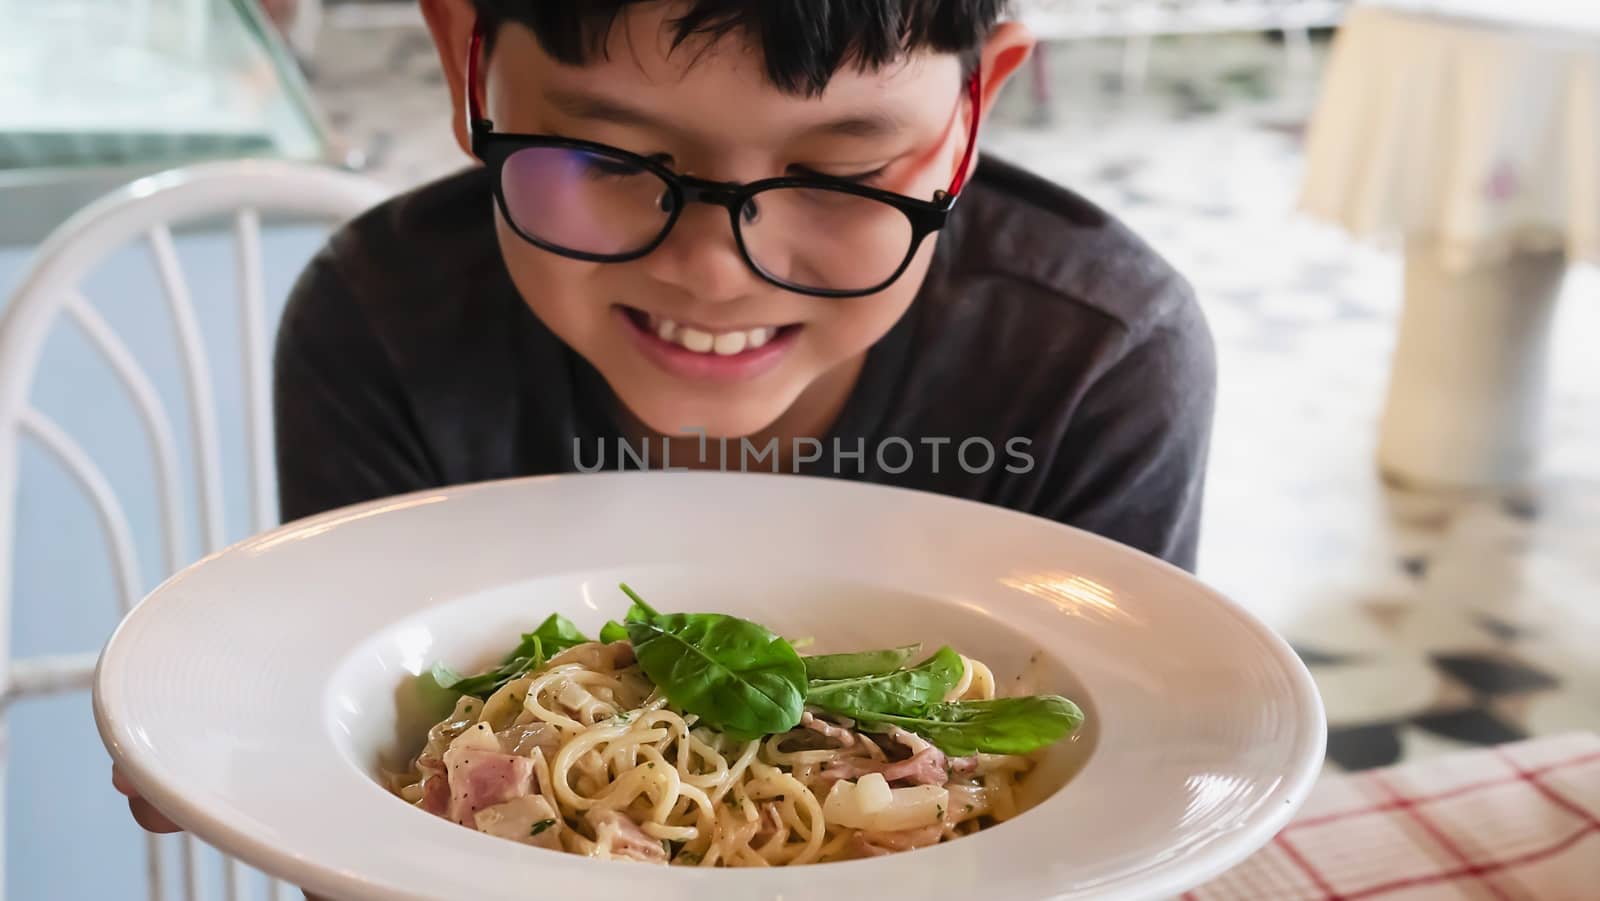 Boy happy eating spaghetti carbonara recipe - people enjoy with famous Italian dish food concept by pairhandmade